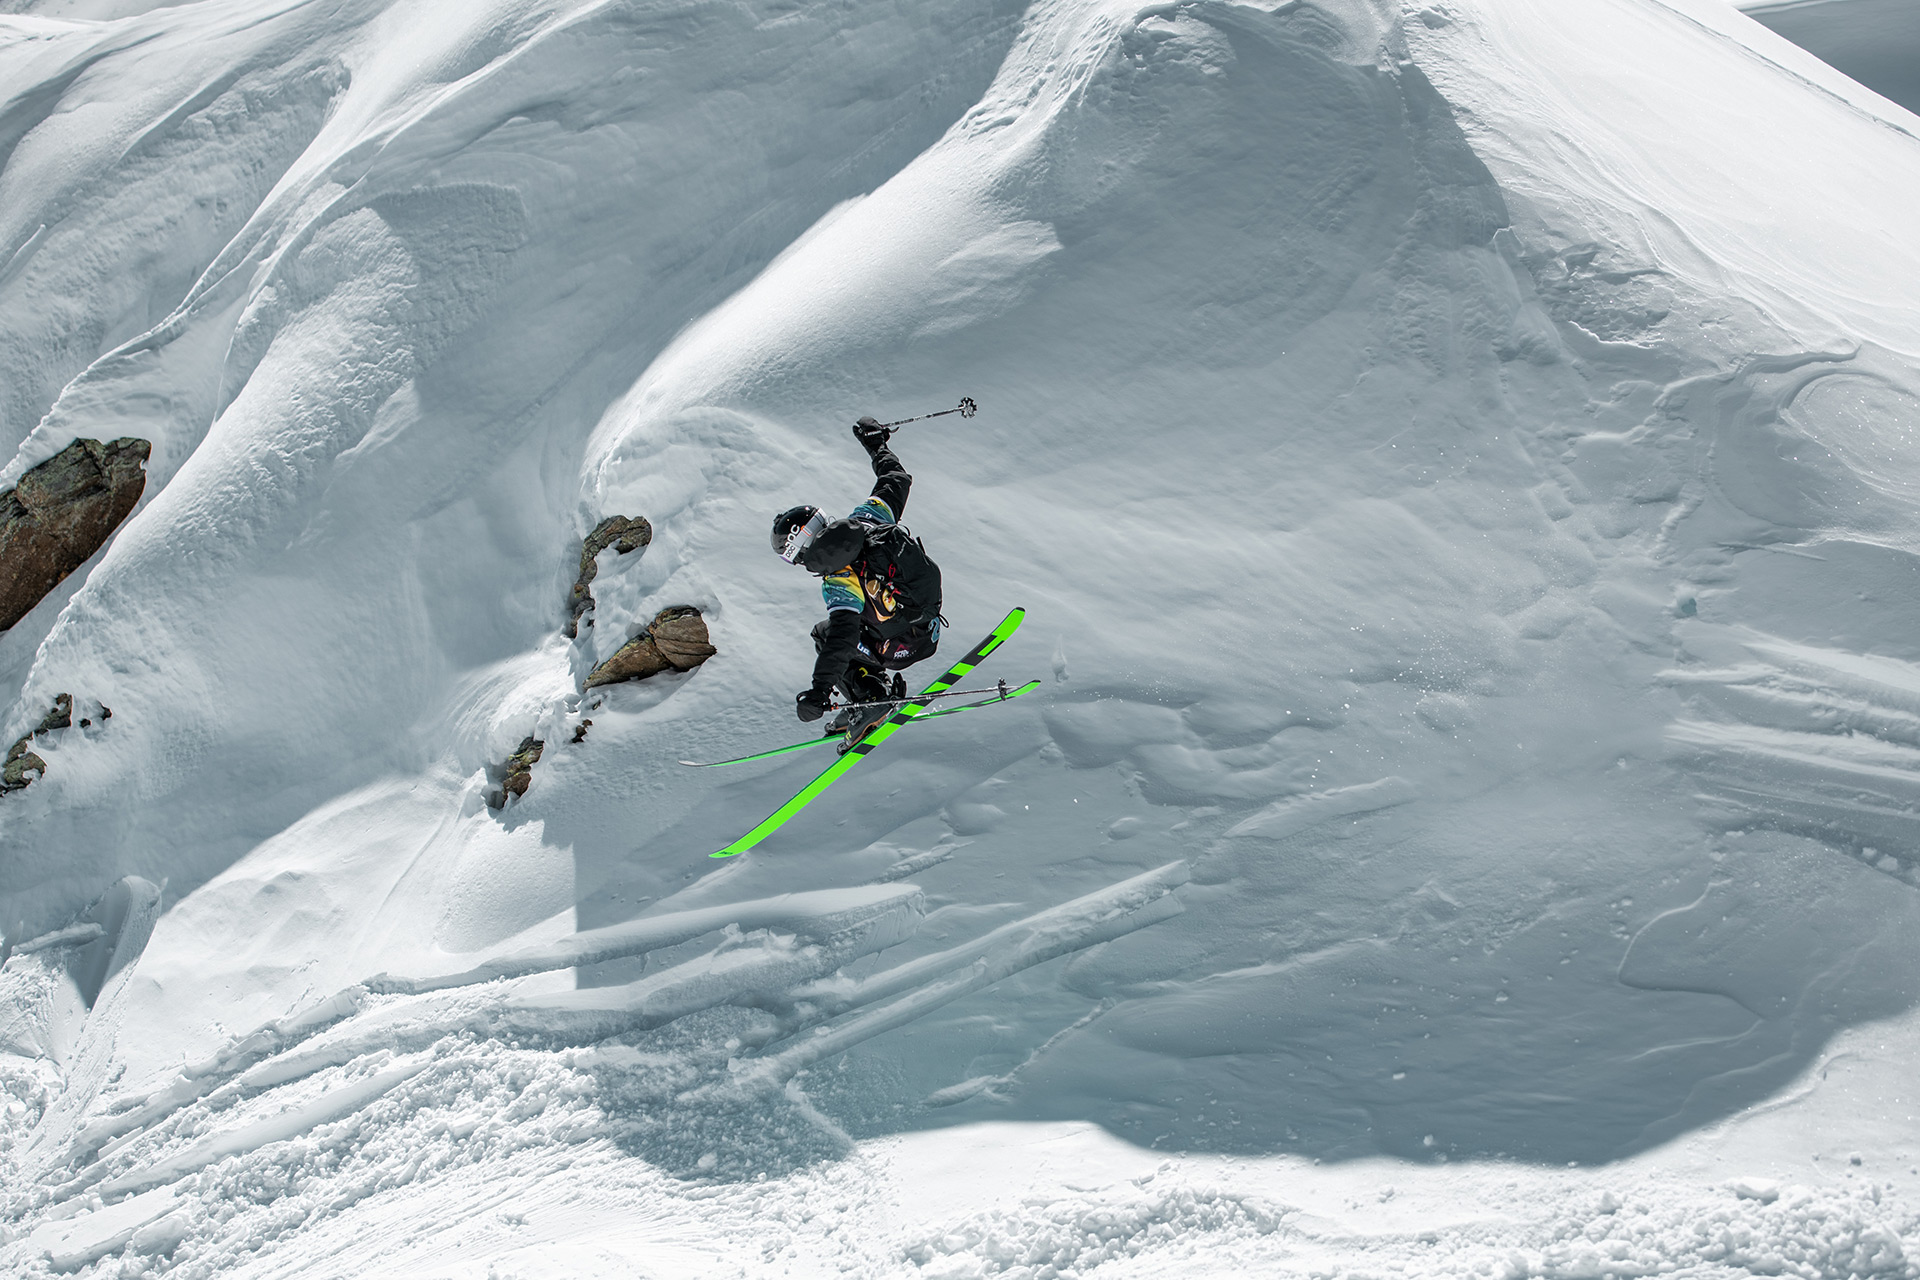 Max Zimmermann competes in the Open Faces freeride contest in Kappl, Austria